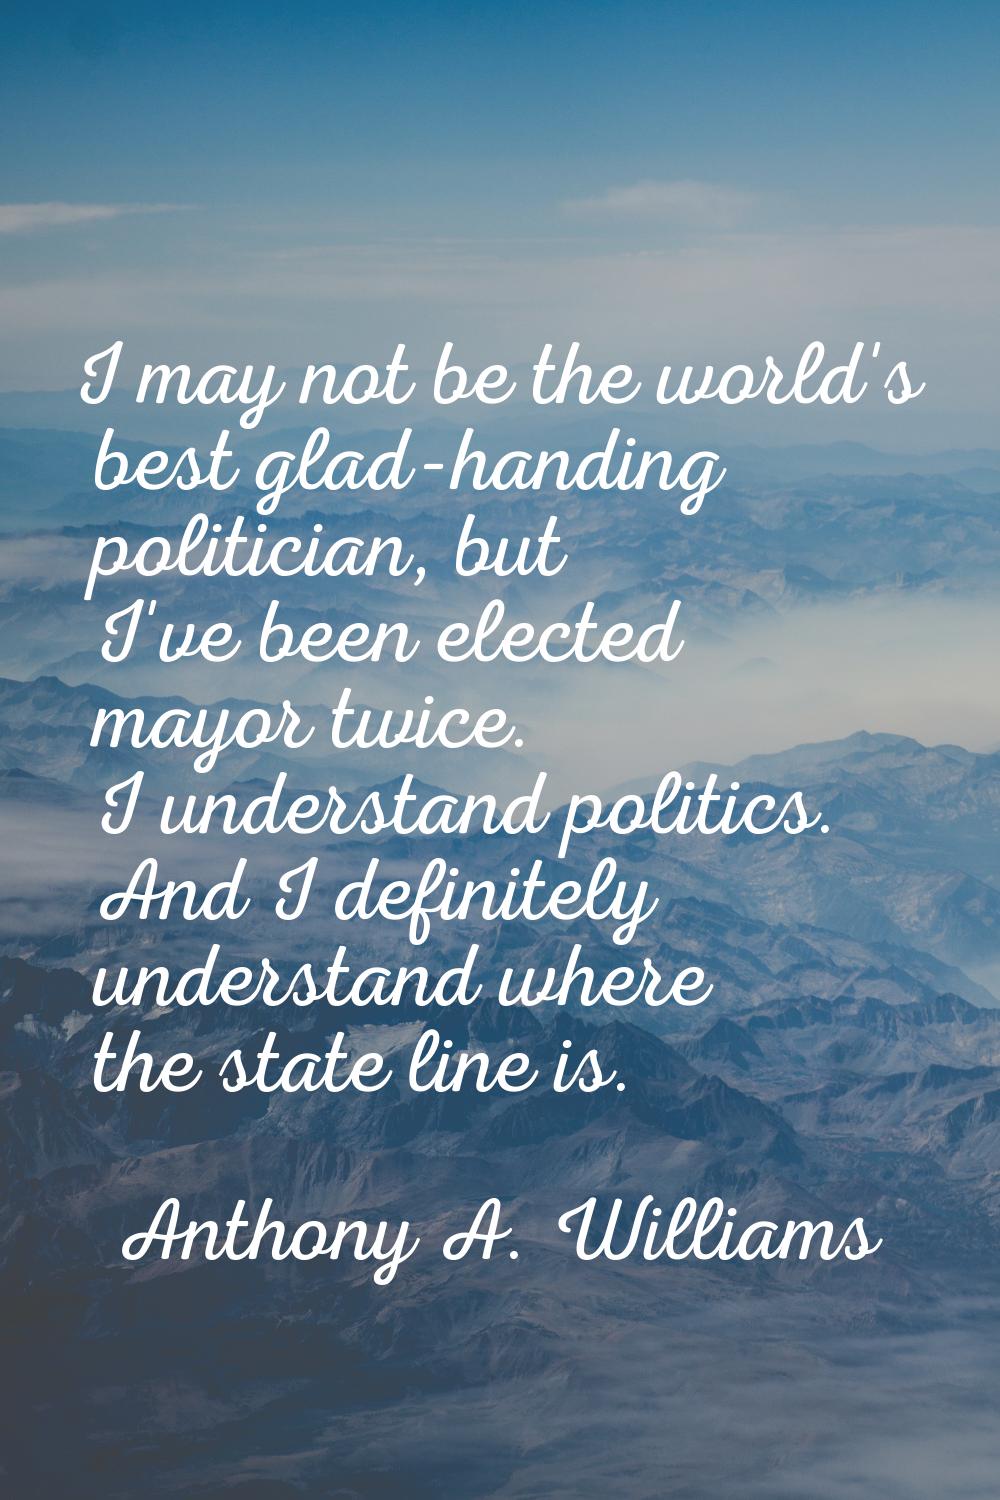 I may not be the world's best glad-handing politician, but I've been elected mayor twice. I underst